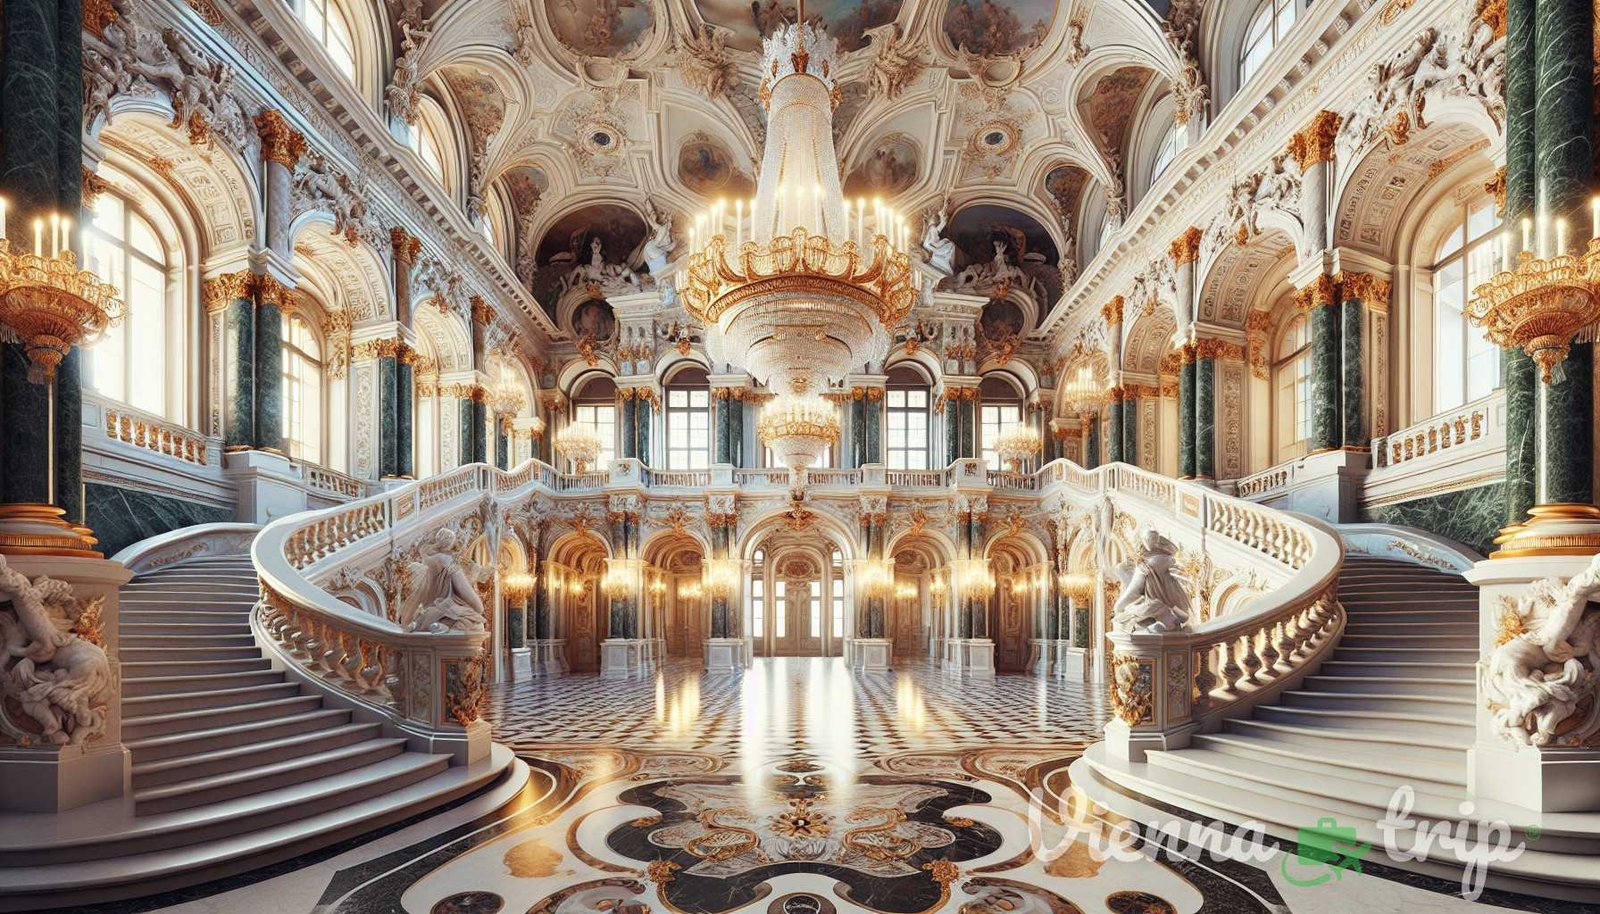 Illustration for section: The Grand Marble Hall: This magnificent hall is the centerpiece of the Upper Belvedere. With its int - belvedere secrets